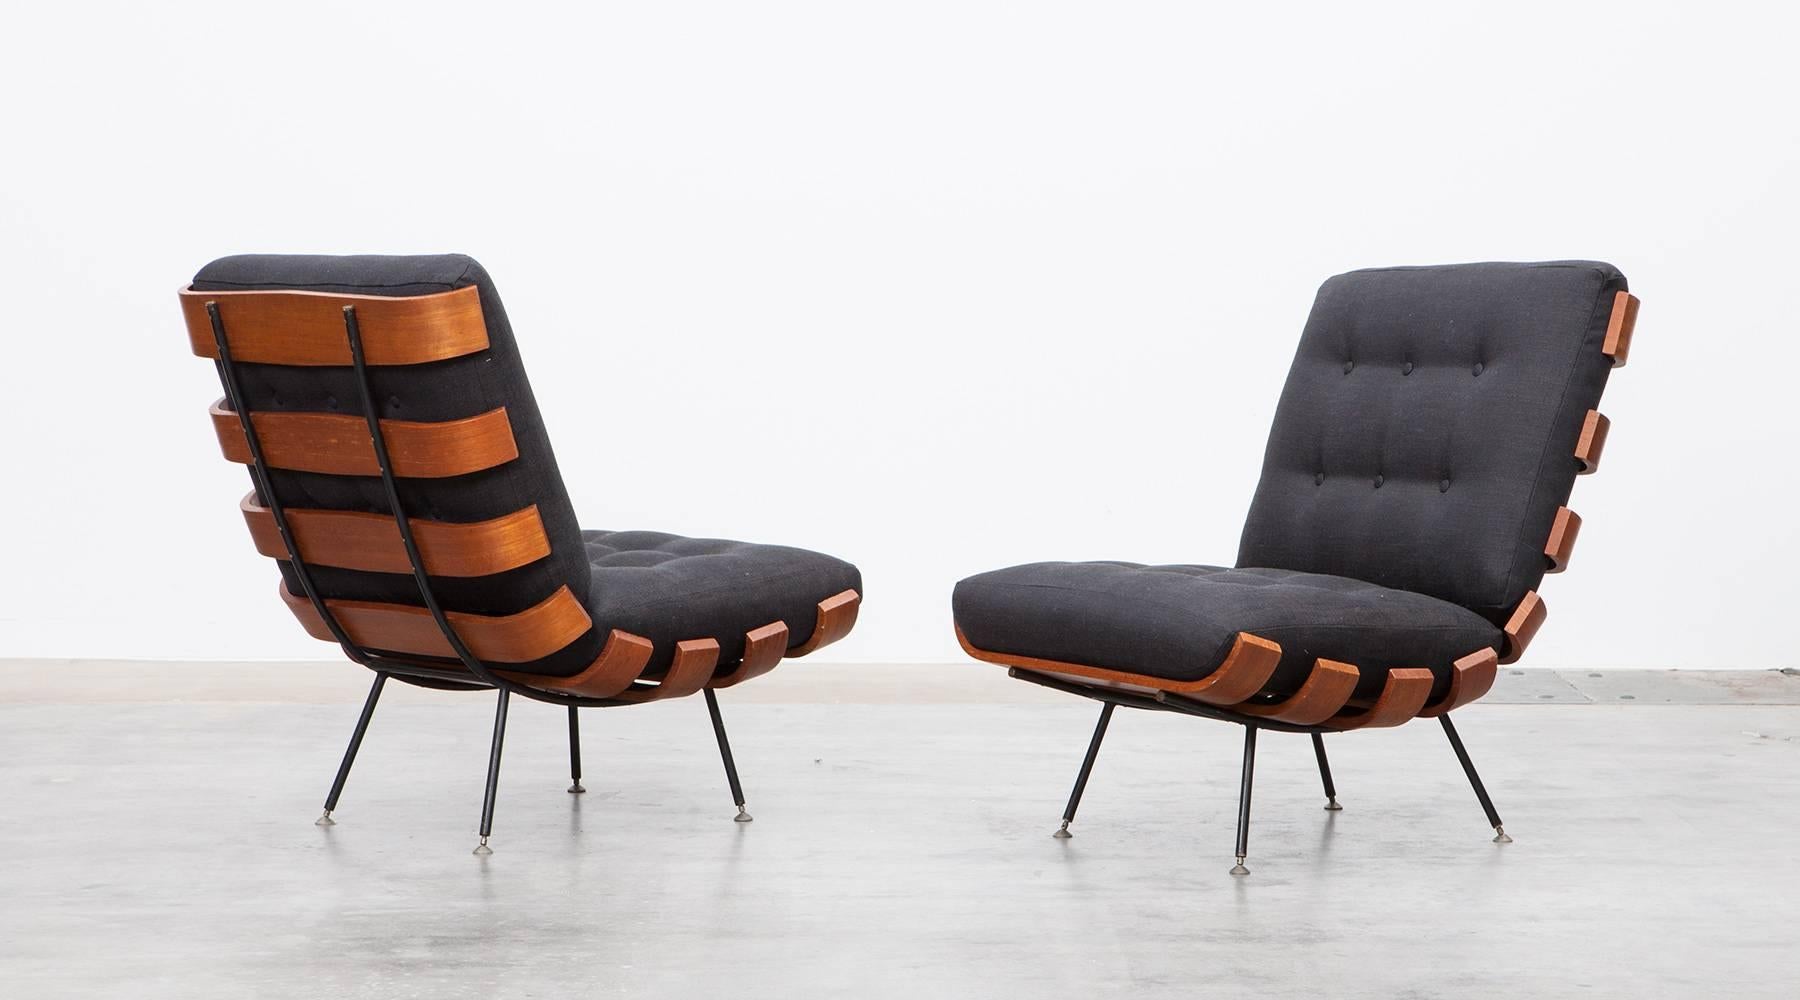 Wonderful Brazilian lounge chairs designed by Martin Eisler and Carlo Hauner. This pair has been produced in teak and plywood slats bent elegant to the ends and stands on a black lacquered metal frame with brass feet. The cushions are recently newly